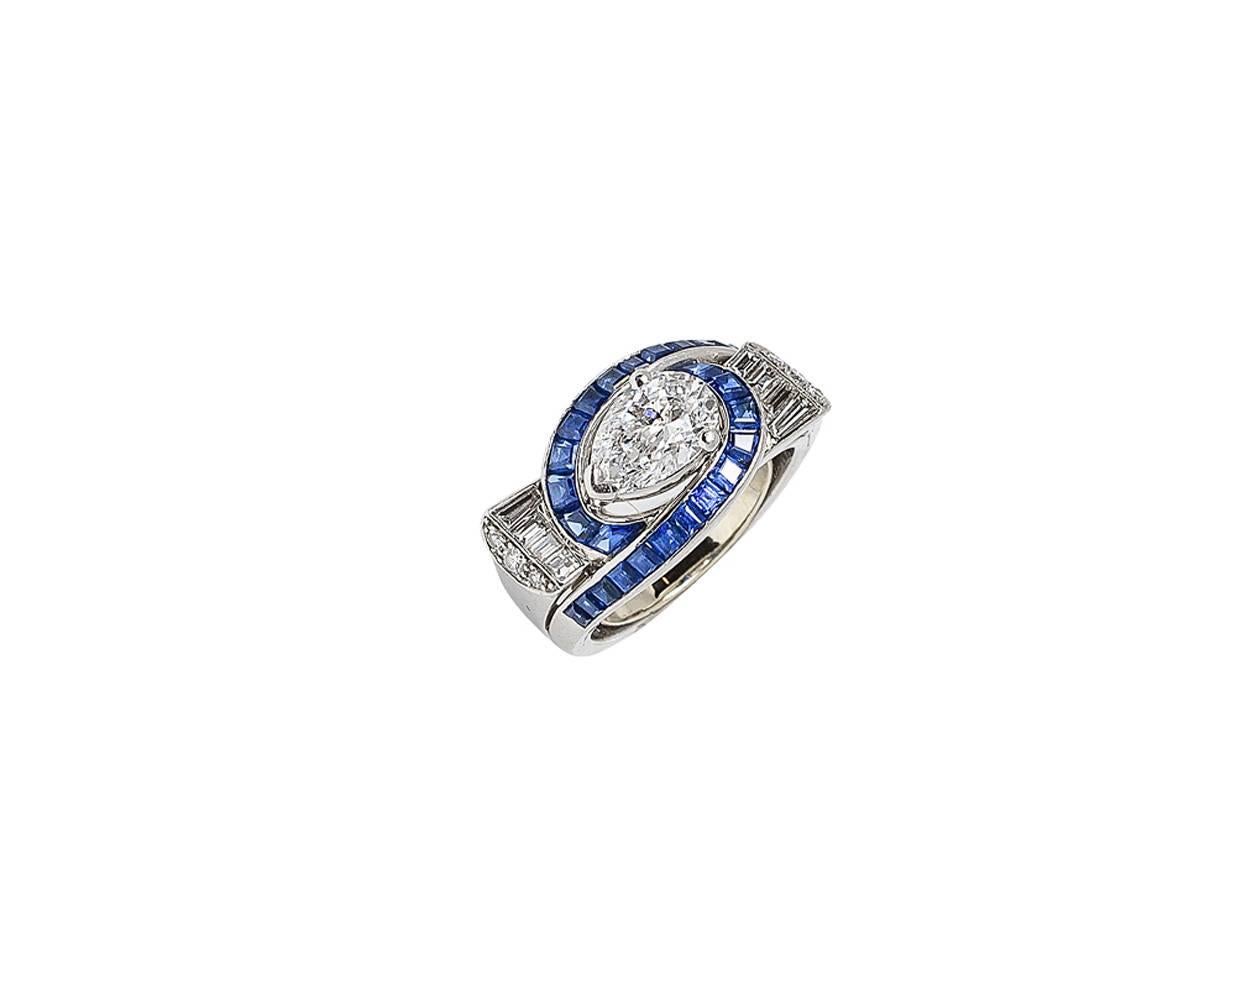 Oscar Heyman Art Deco GIA Cert. 1.39 Ct. D-Color Diamond Sapphire Platinum Ring In Excellent Condition For Sale In Calabasas, CA